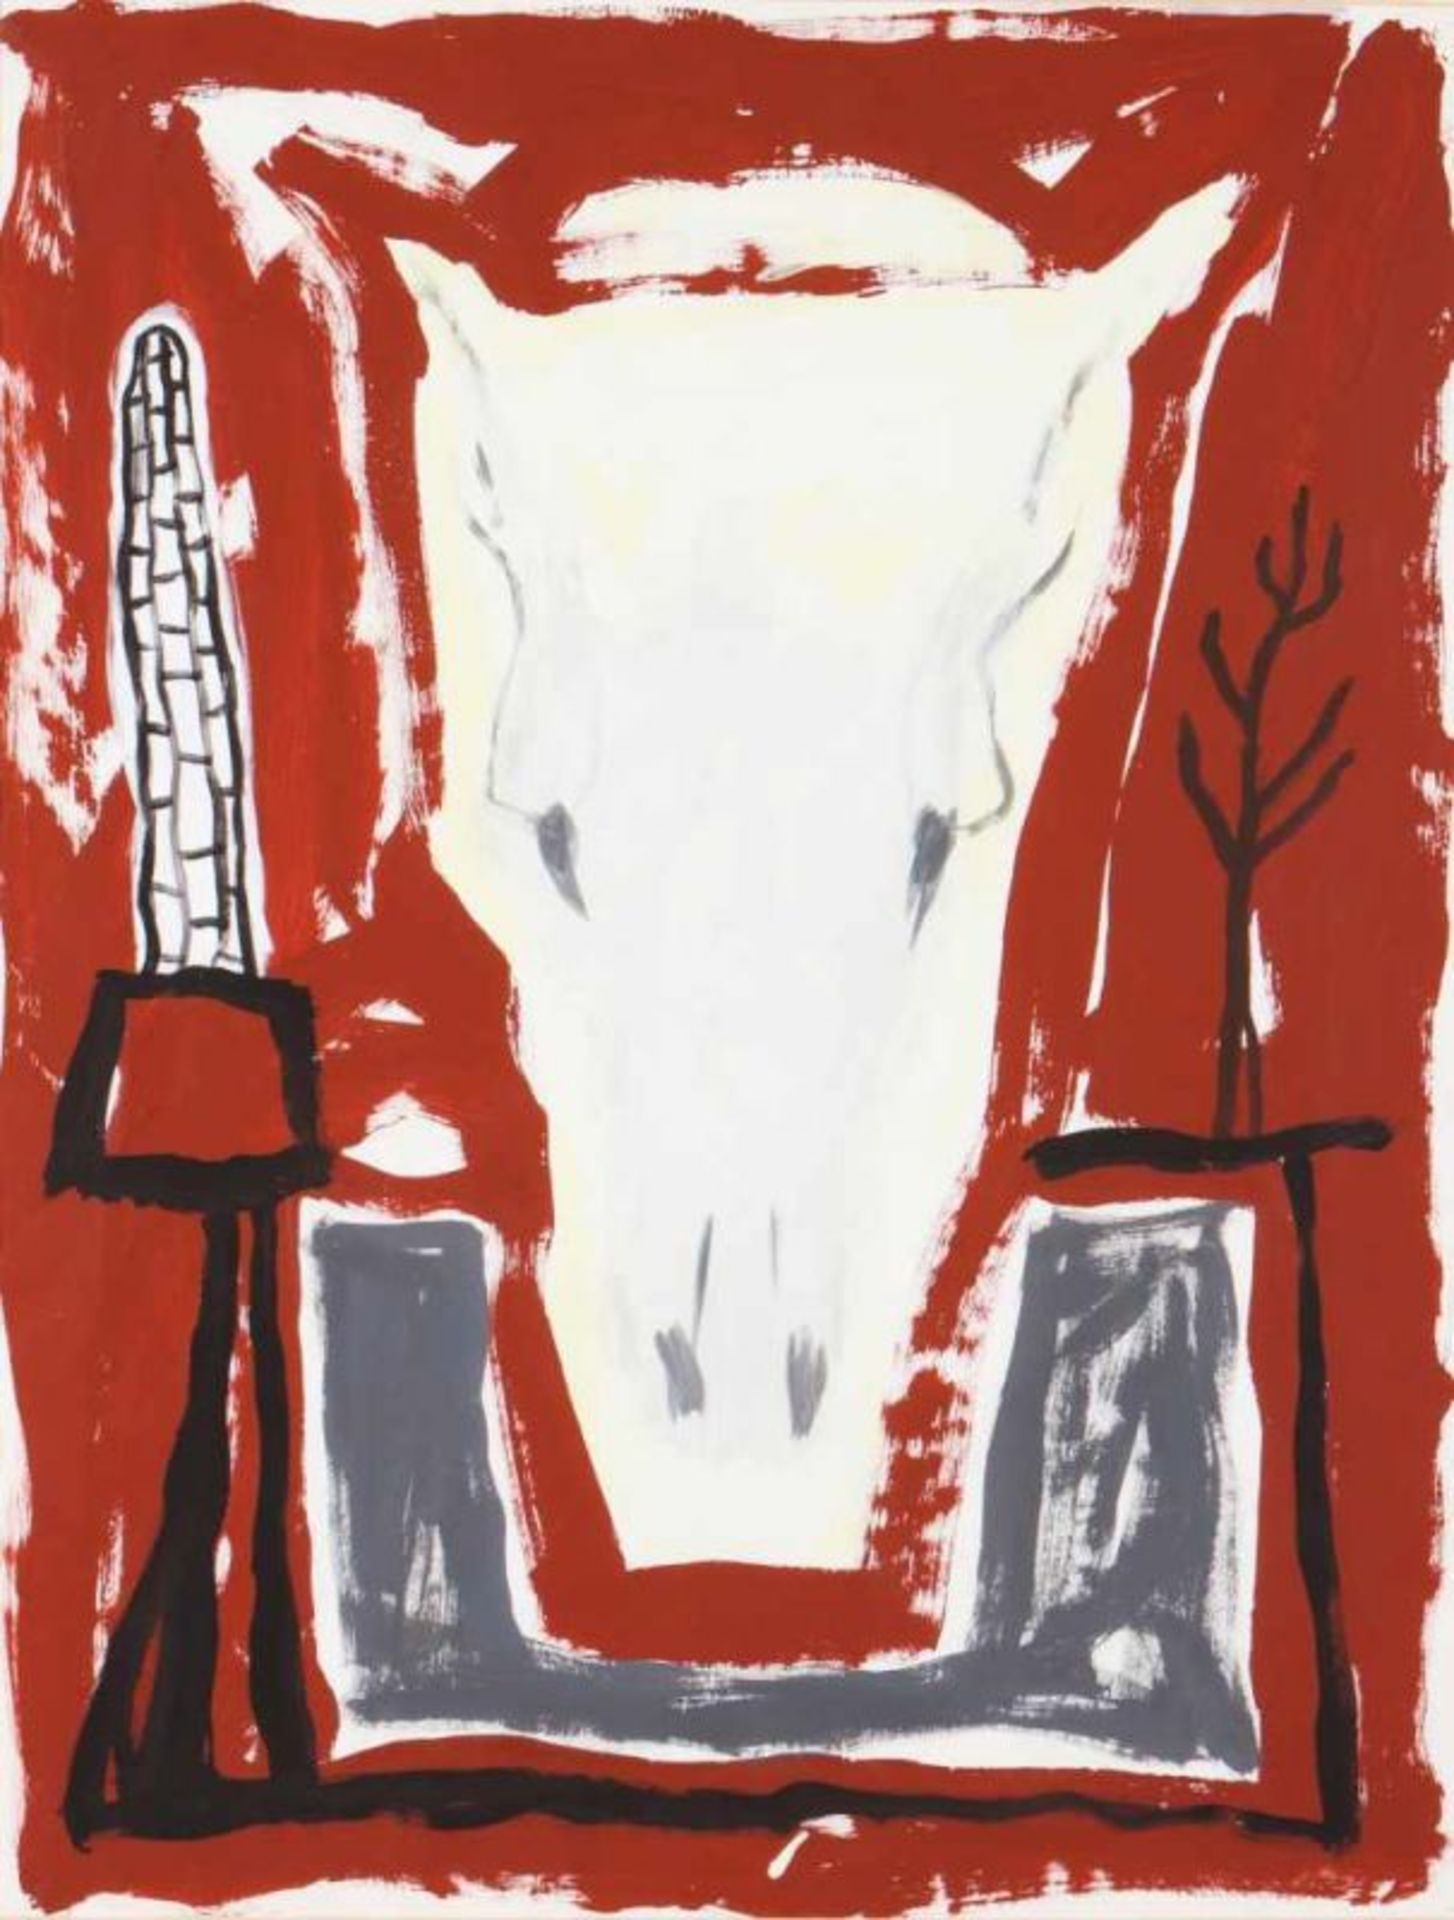 Julião Sarmento (n. 1948) Untitled (#412) Acrylic paint on paper Signed and dated 9/2/85 on the